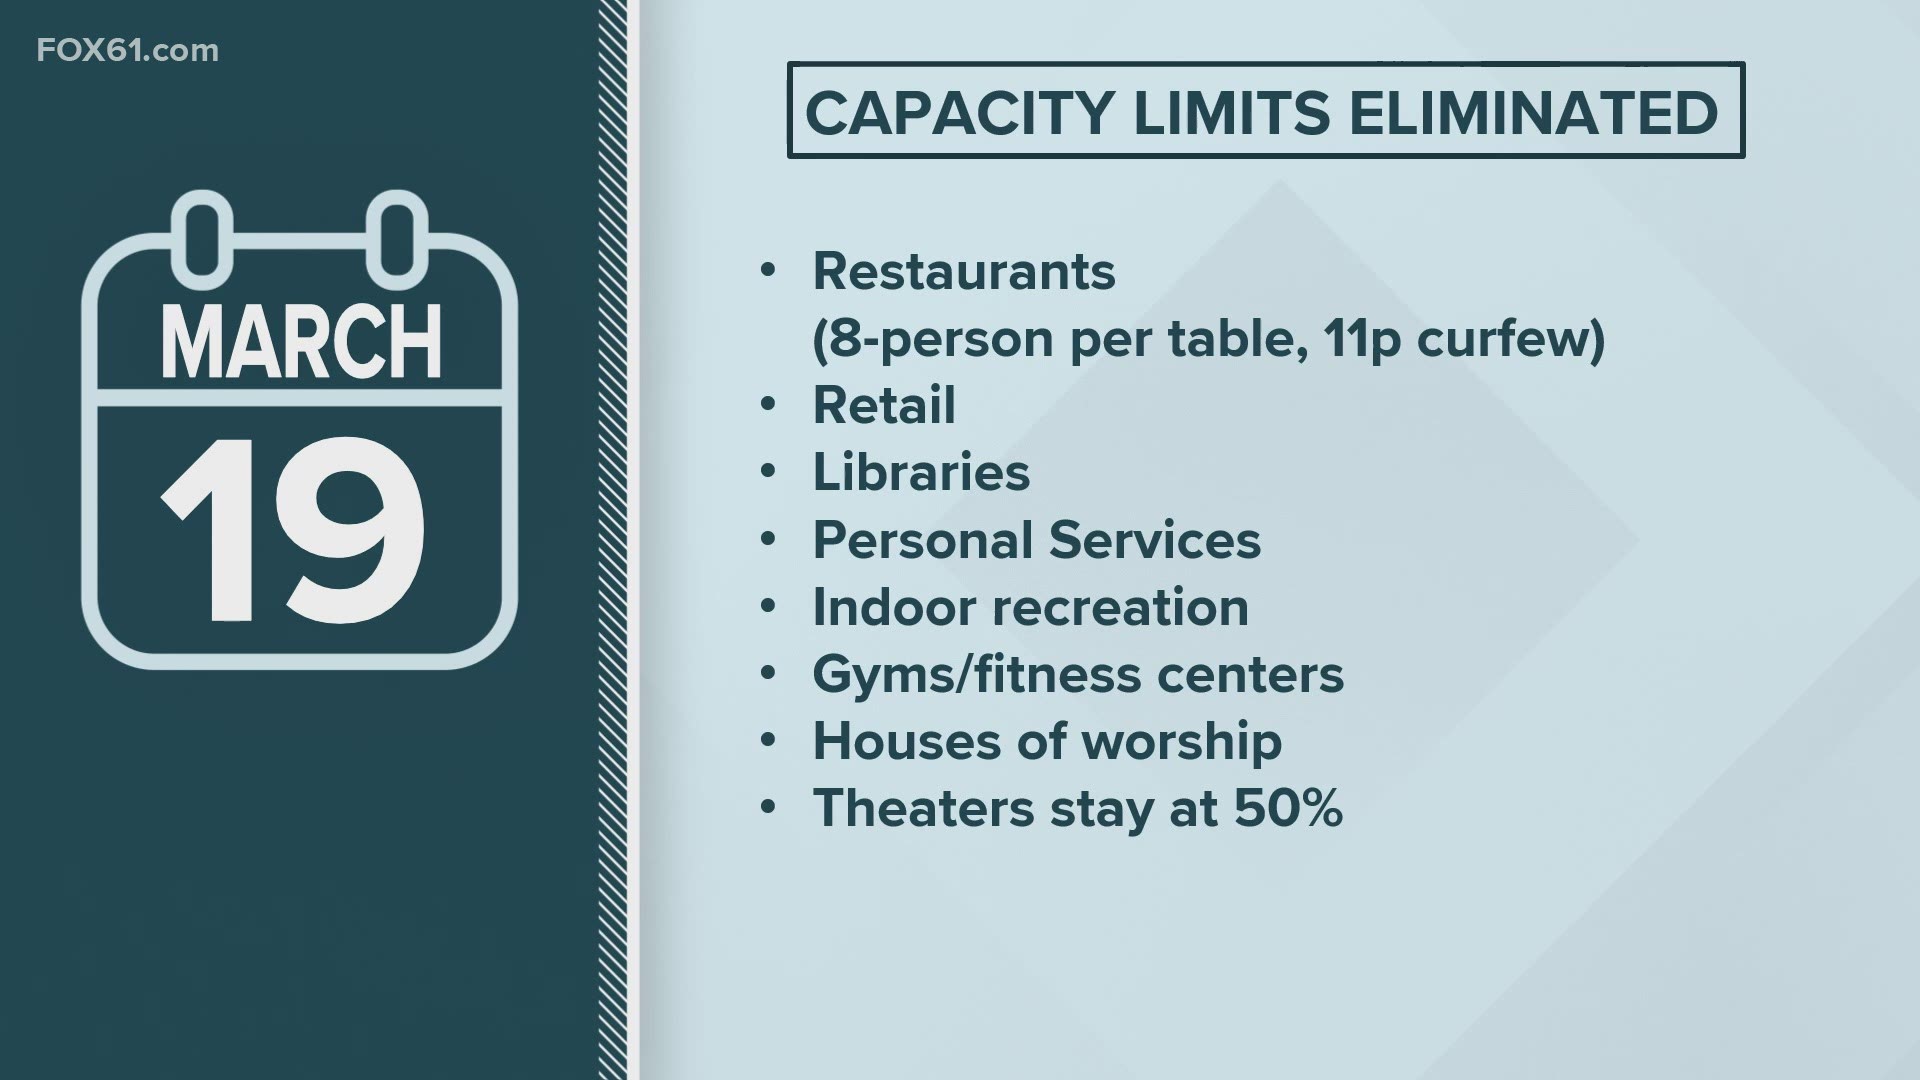 The revision of the guidelines will impact capacity levels and travel restrictions. Gov. Lamont said the capacity limits rollback will begin on March 19.